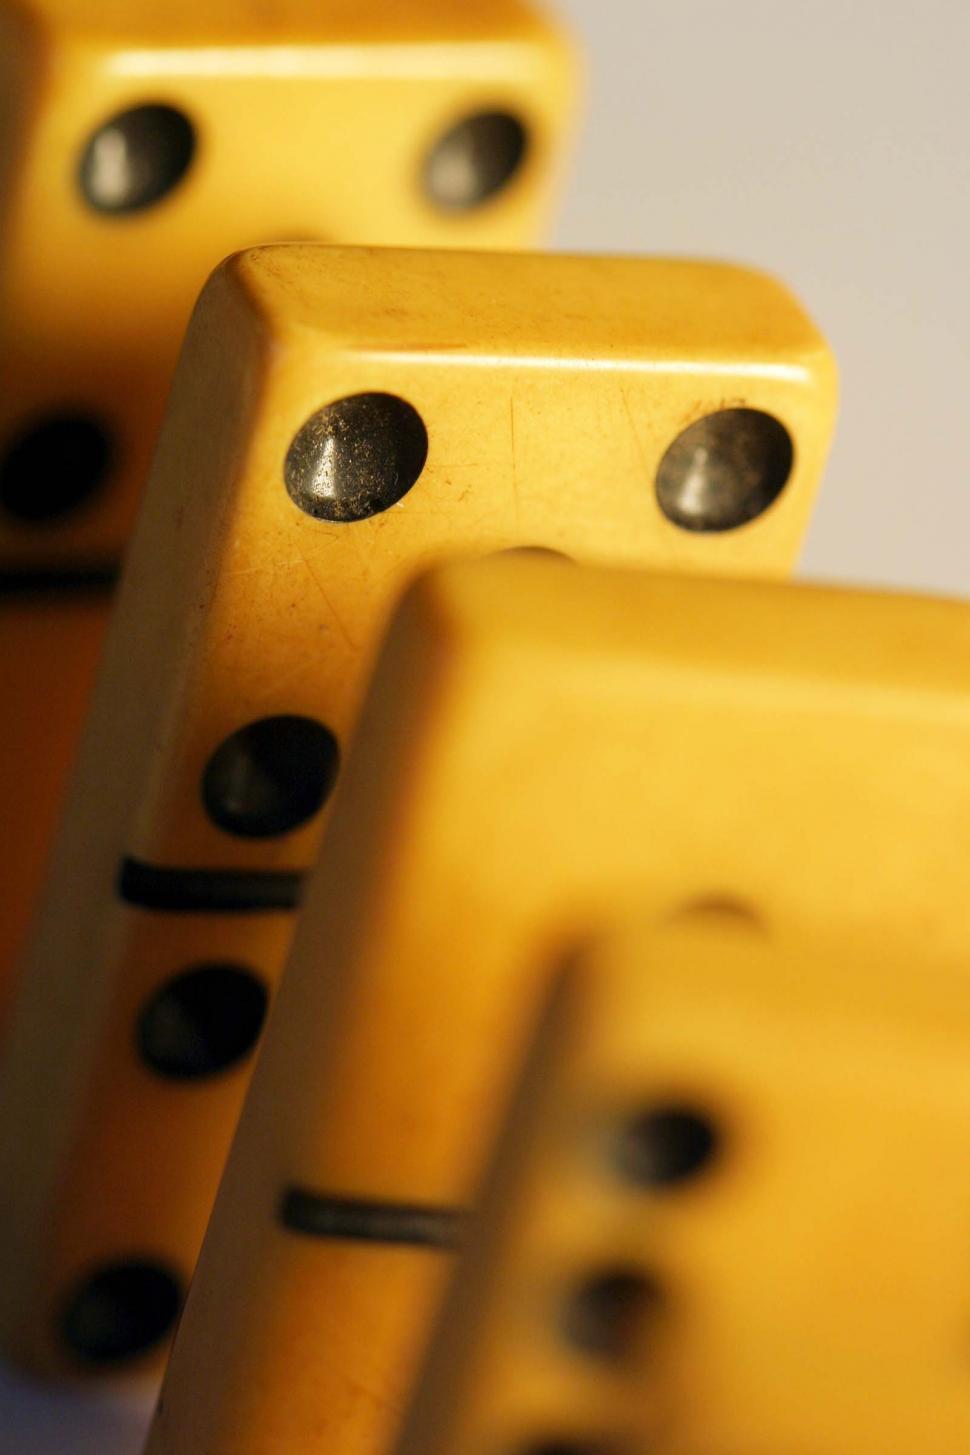 Free Image of Group of Yellow Dominoes Stacked Together 